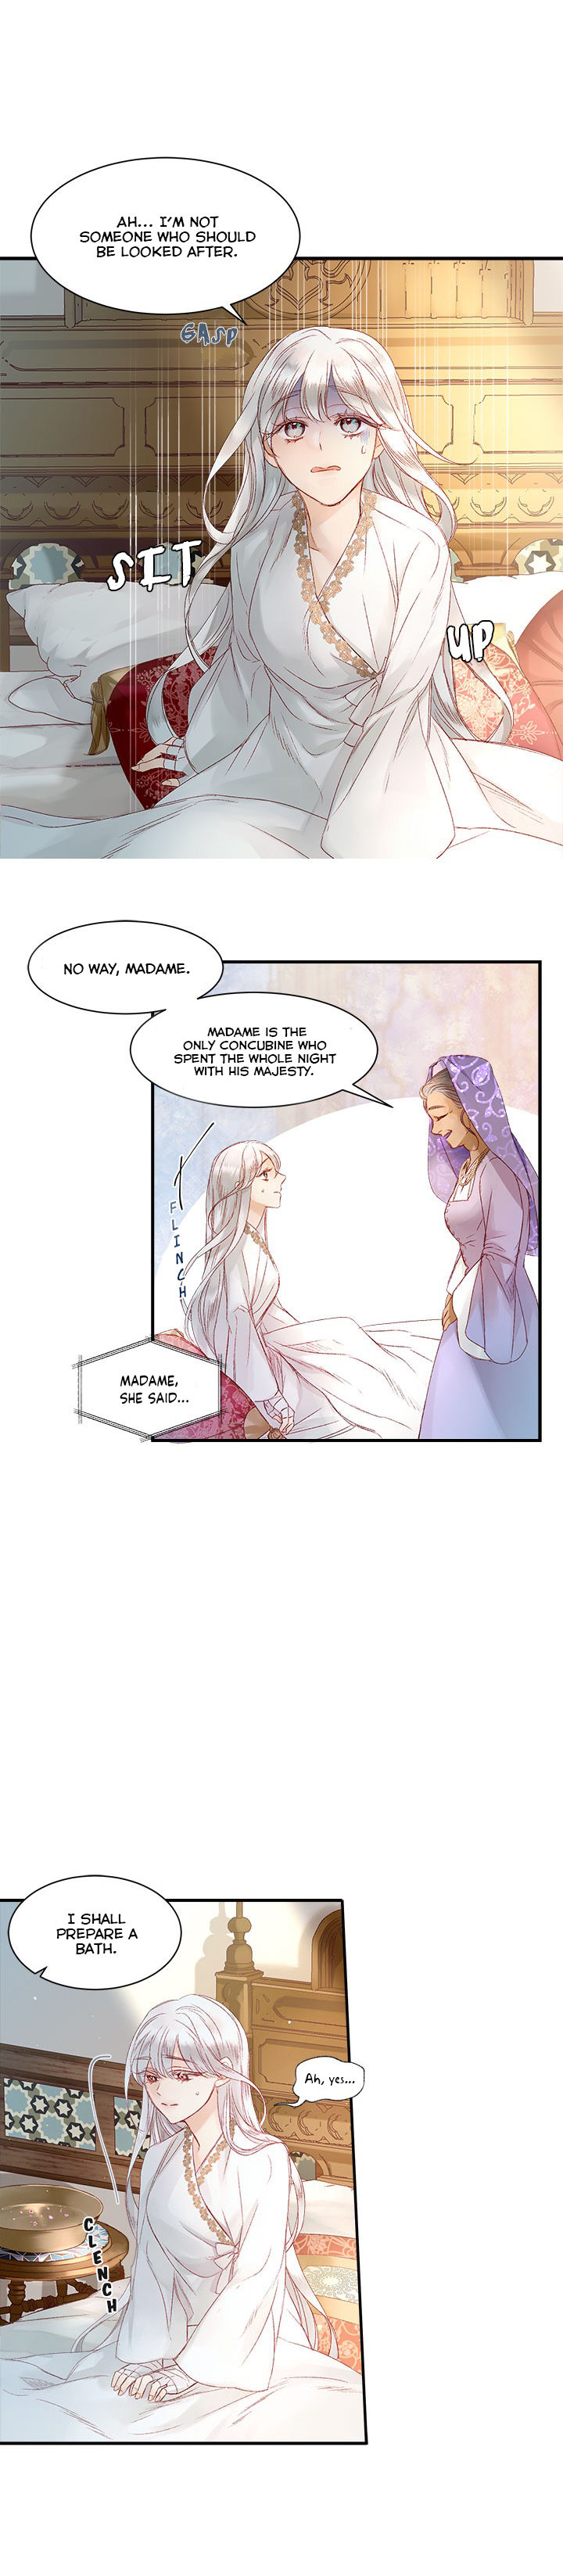 Sultan’s Love - Chapter 6 Page 12